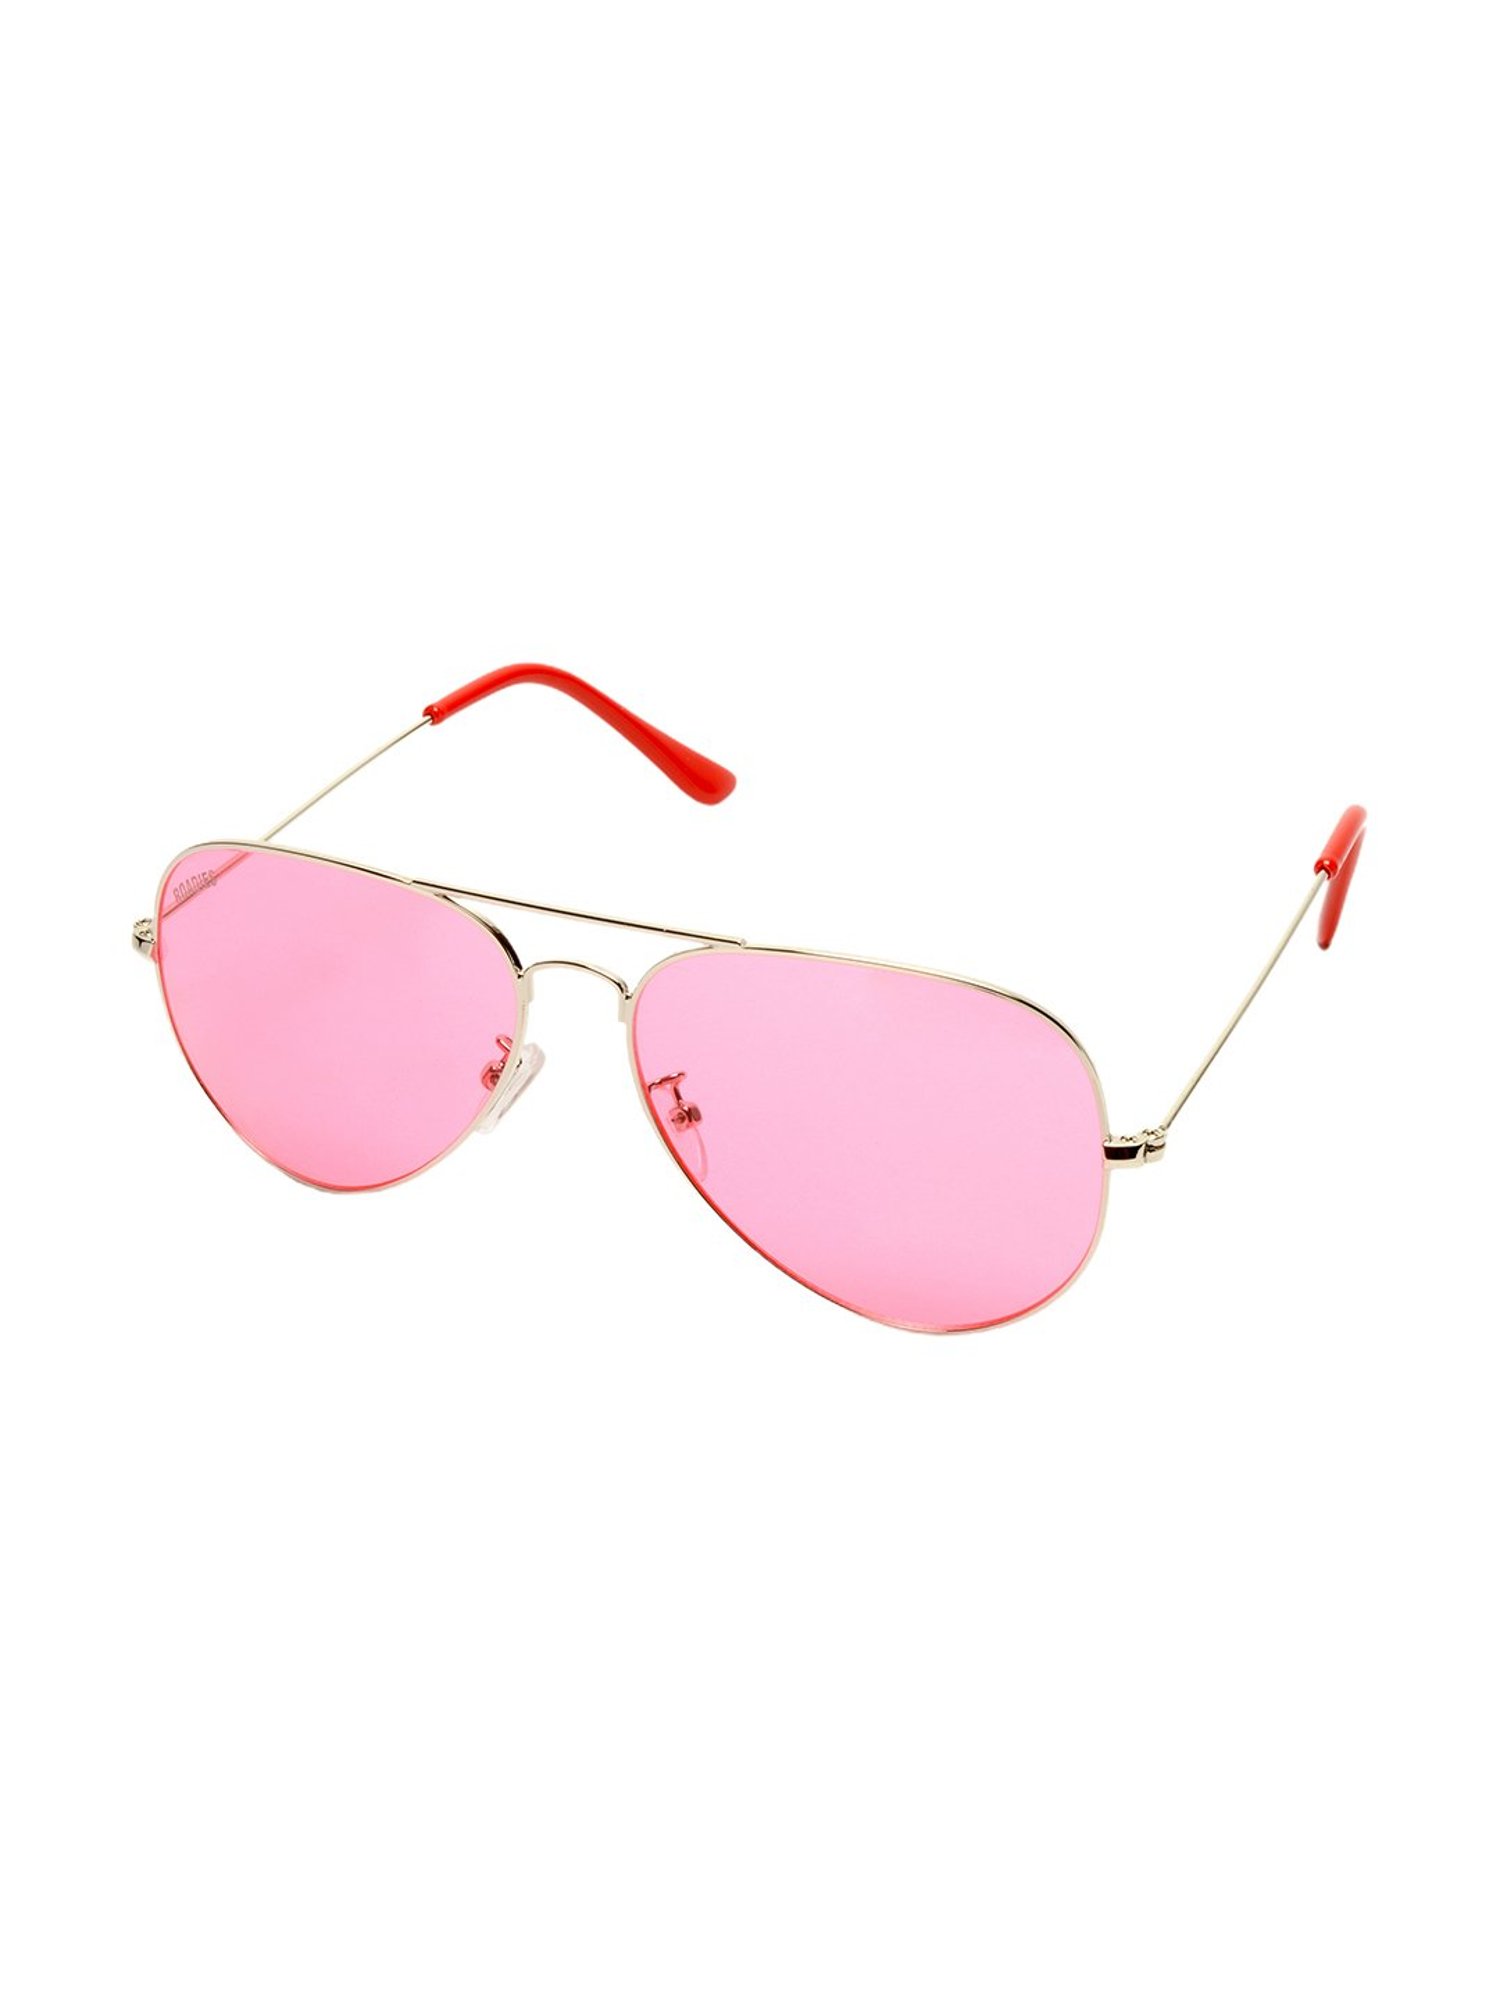 Buy Ray-Ban Aviator Sunglasses (Pink) (RB3025|001/4B58) at Amazon.in